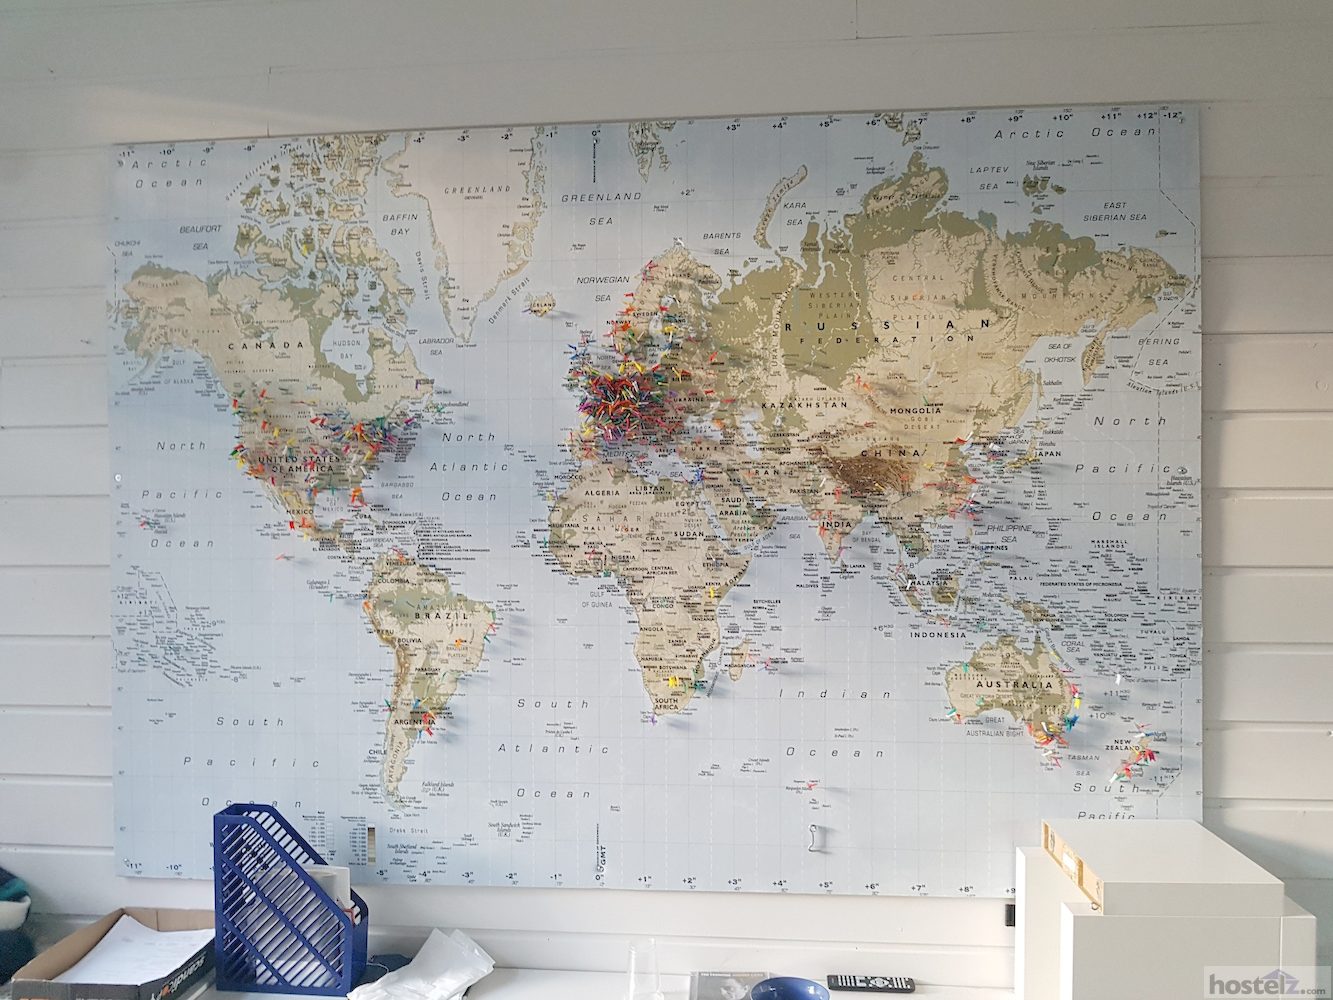 Common area map wall 